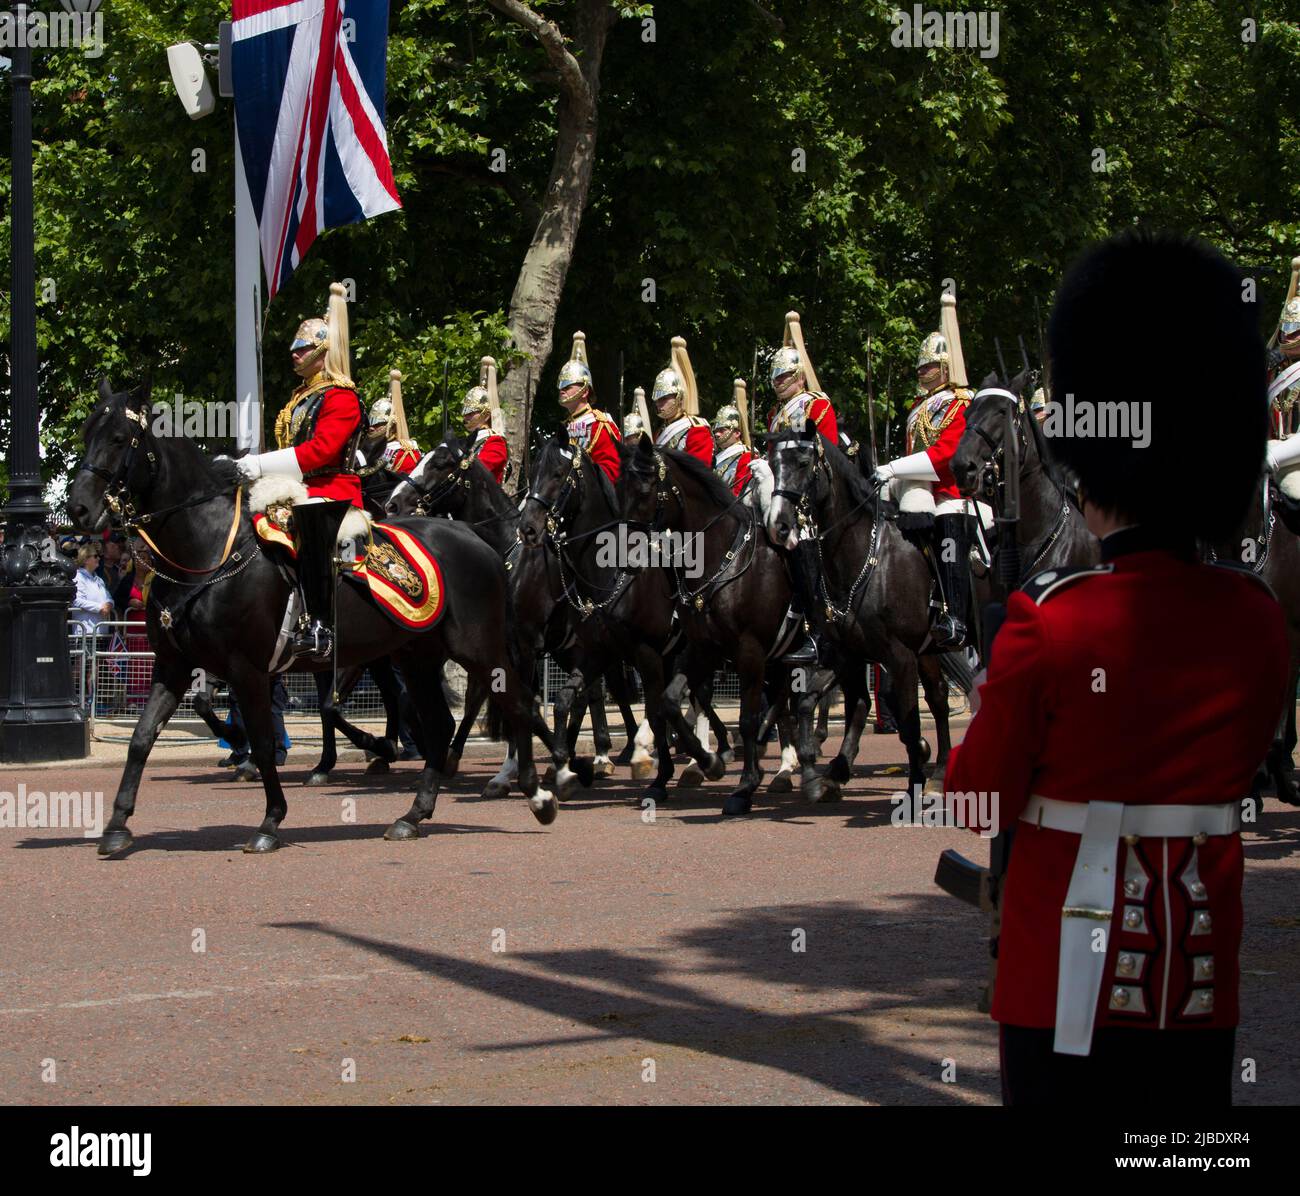 Mounted Lifeguards Parade The Queen's Platinum Jubilee Trooping The Colour Color The Mall London Stock Photo